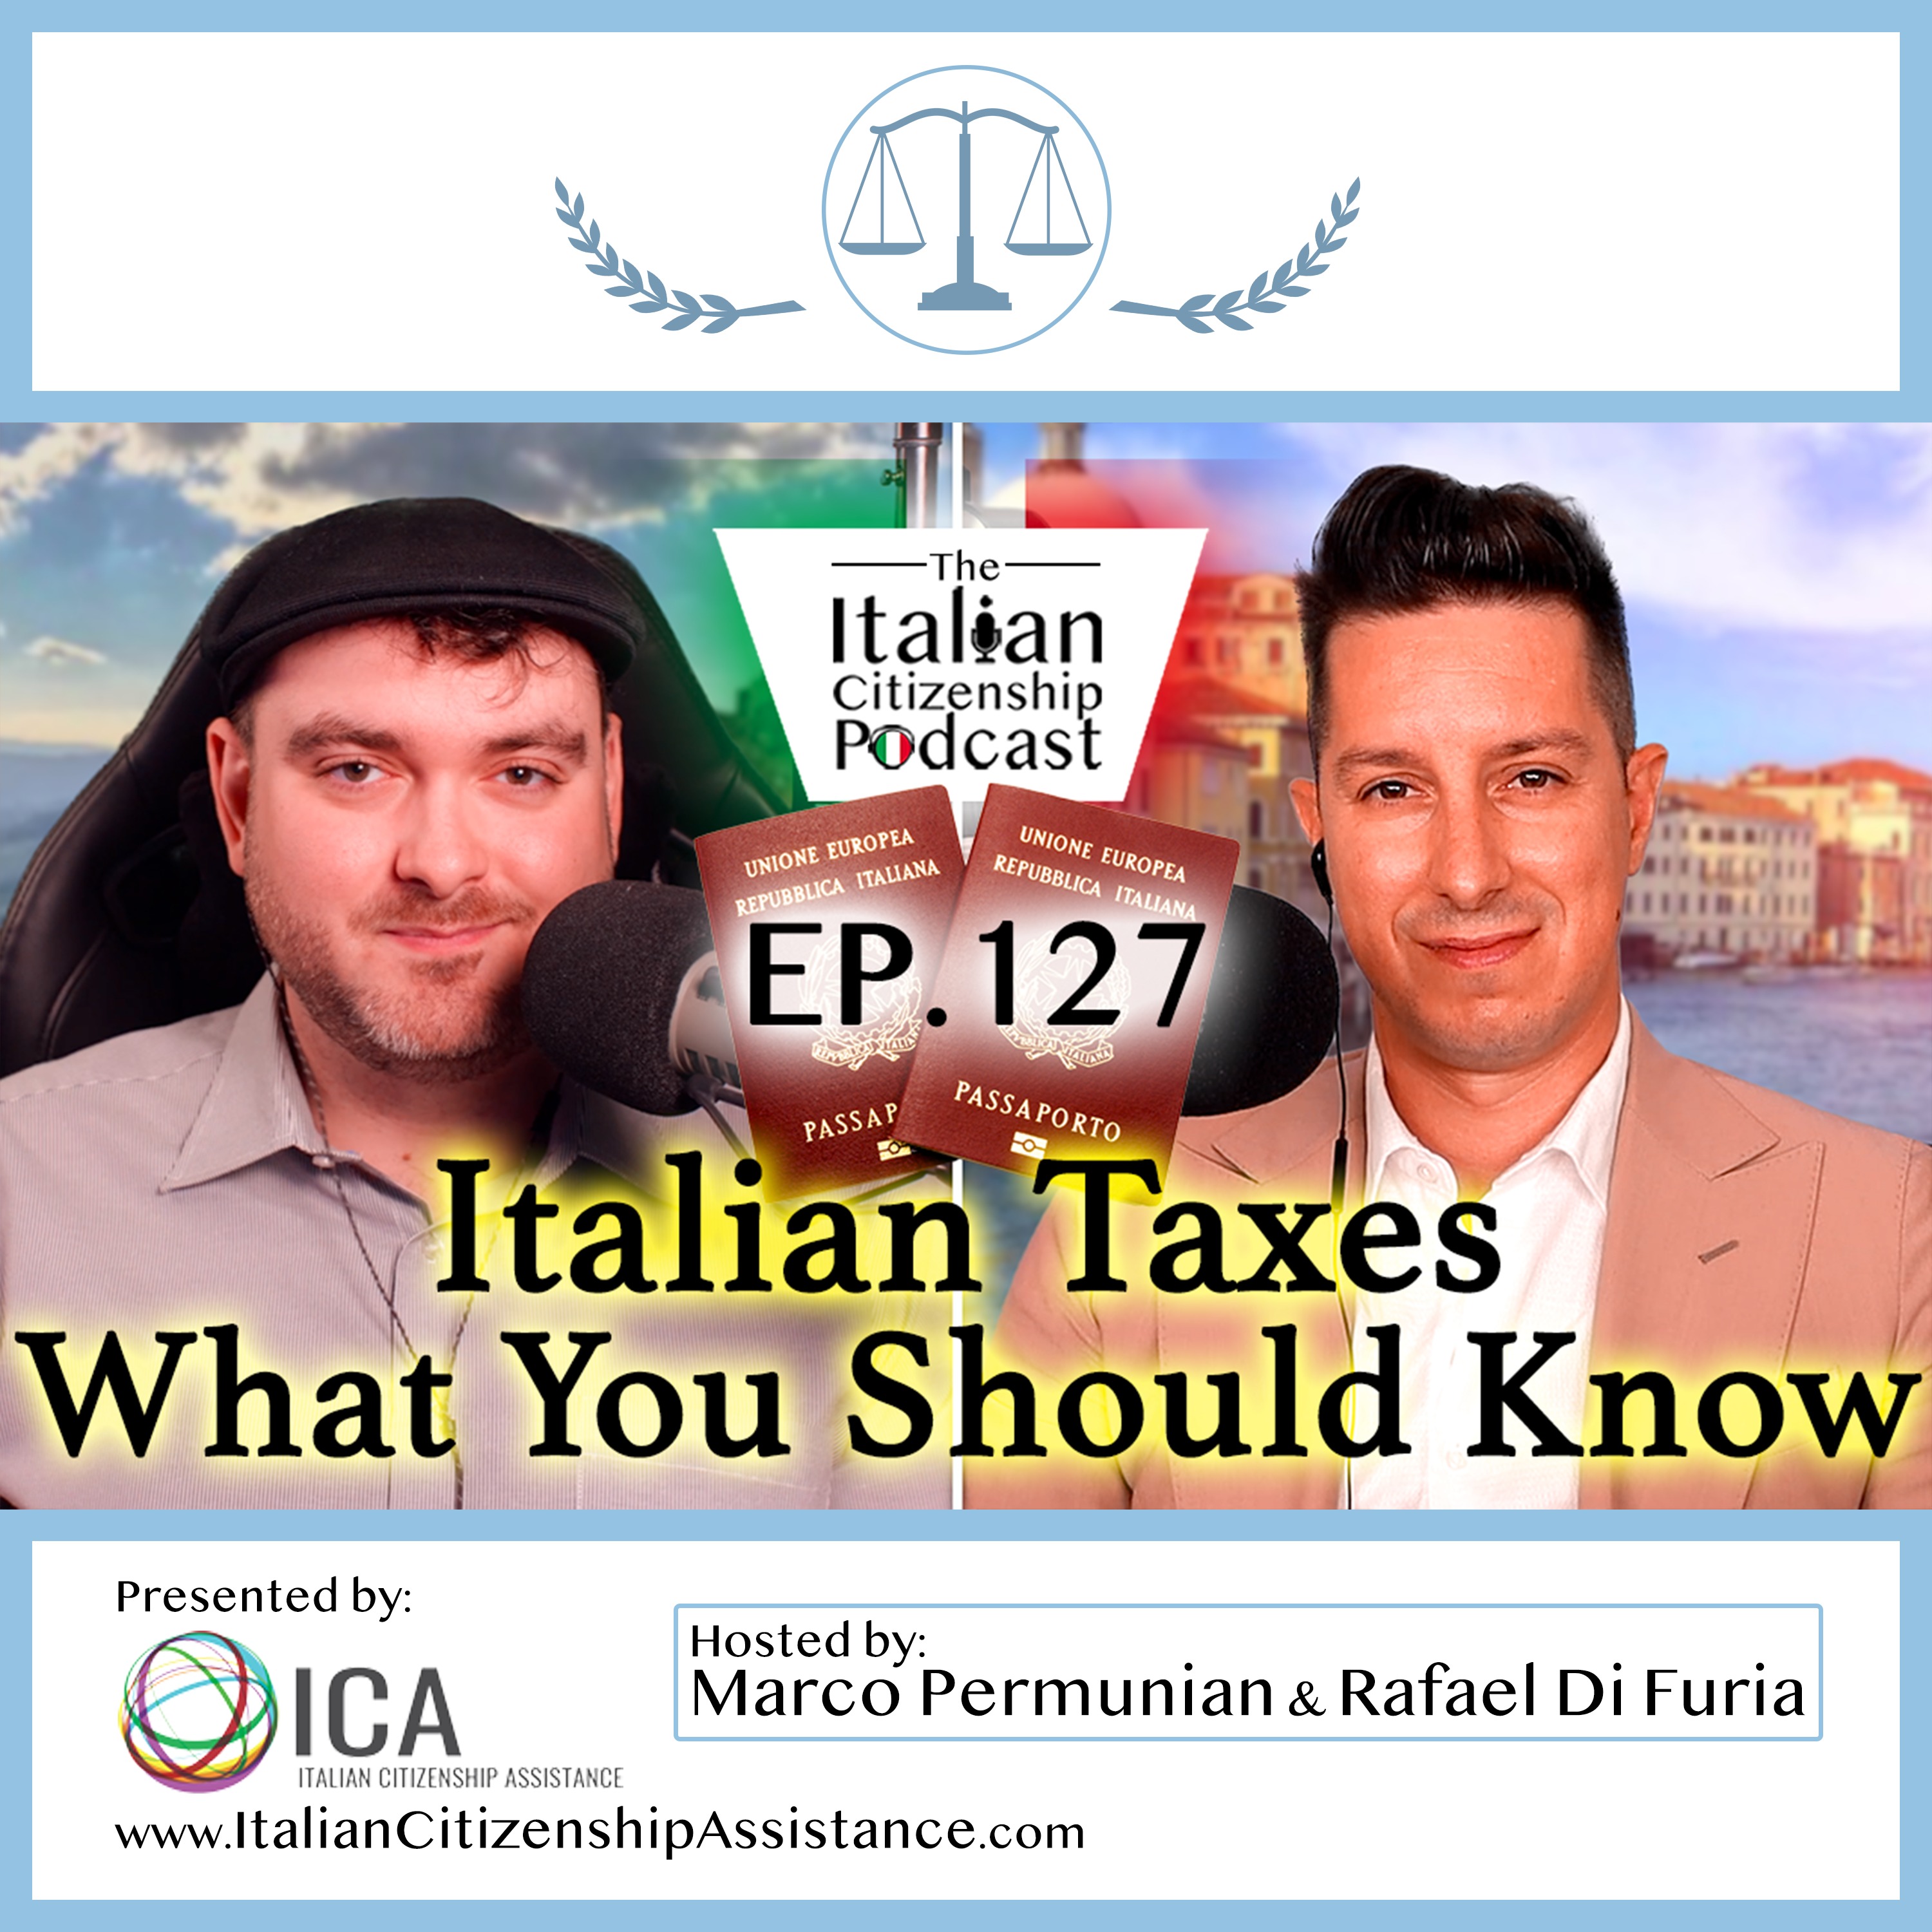 Italian Taxes - What You Should Know